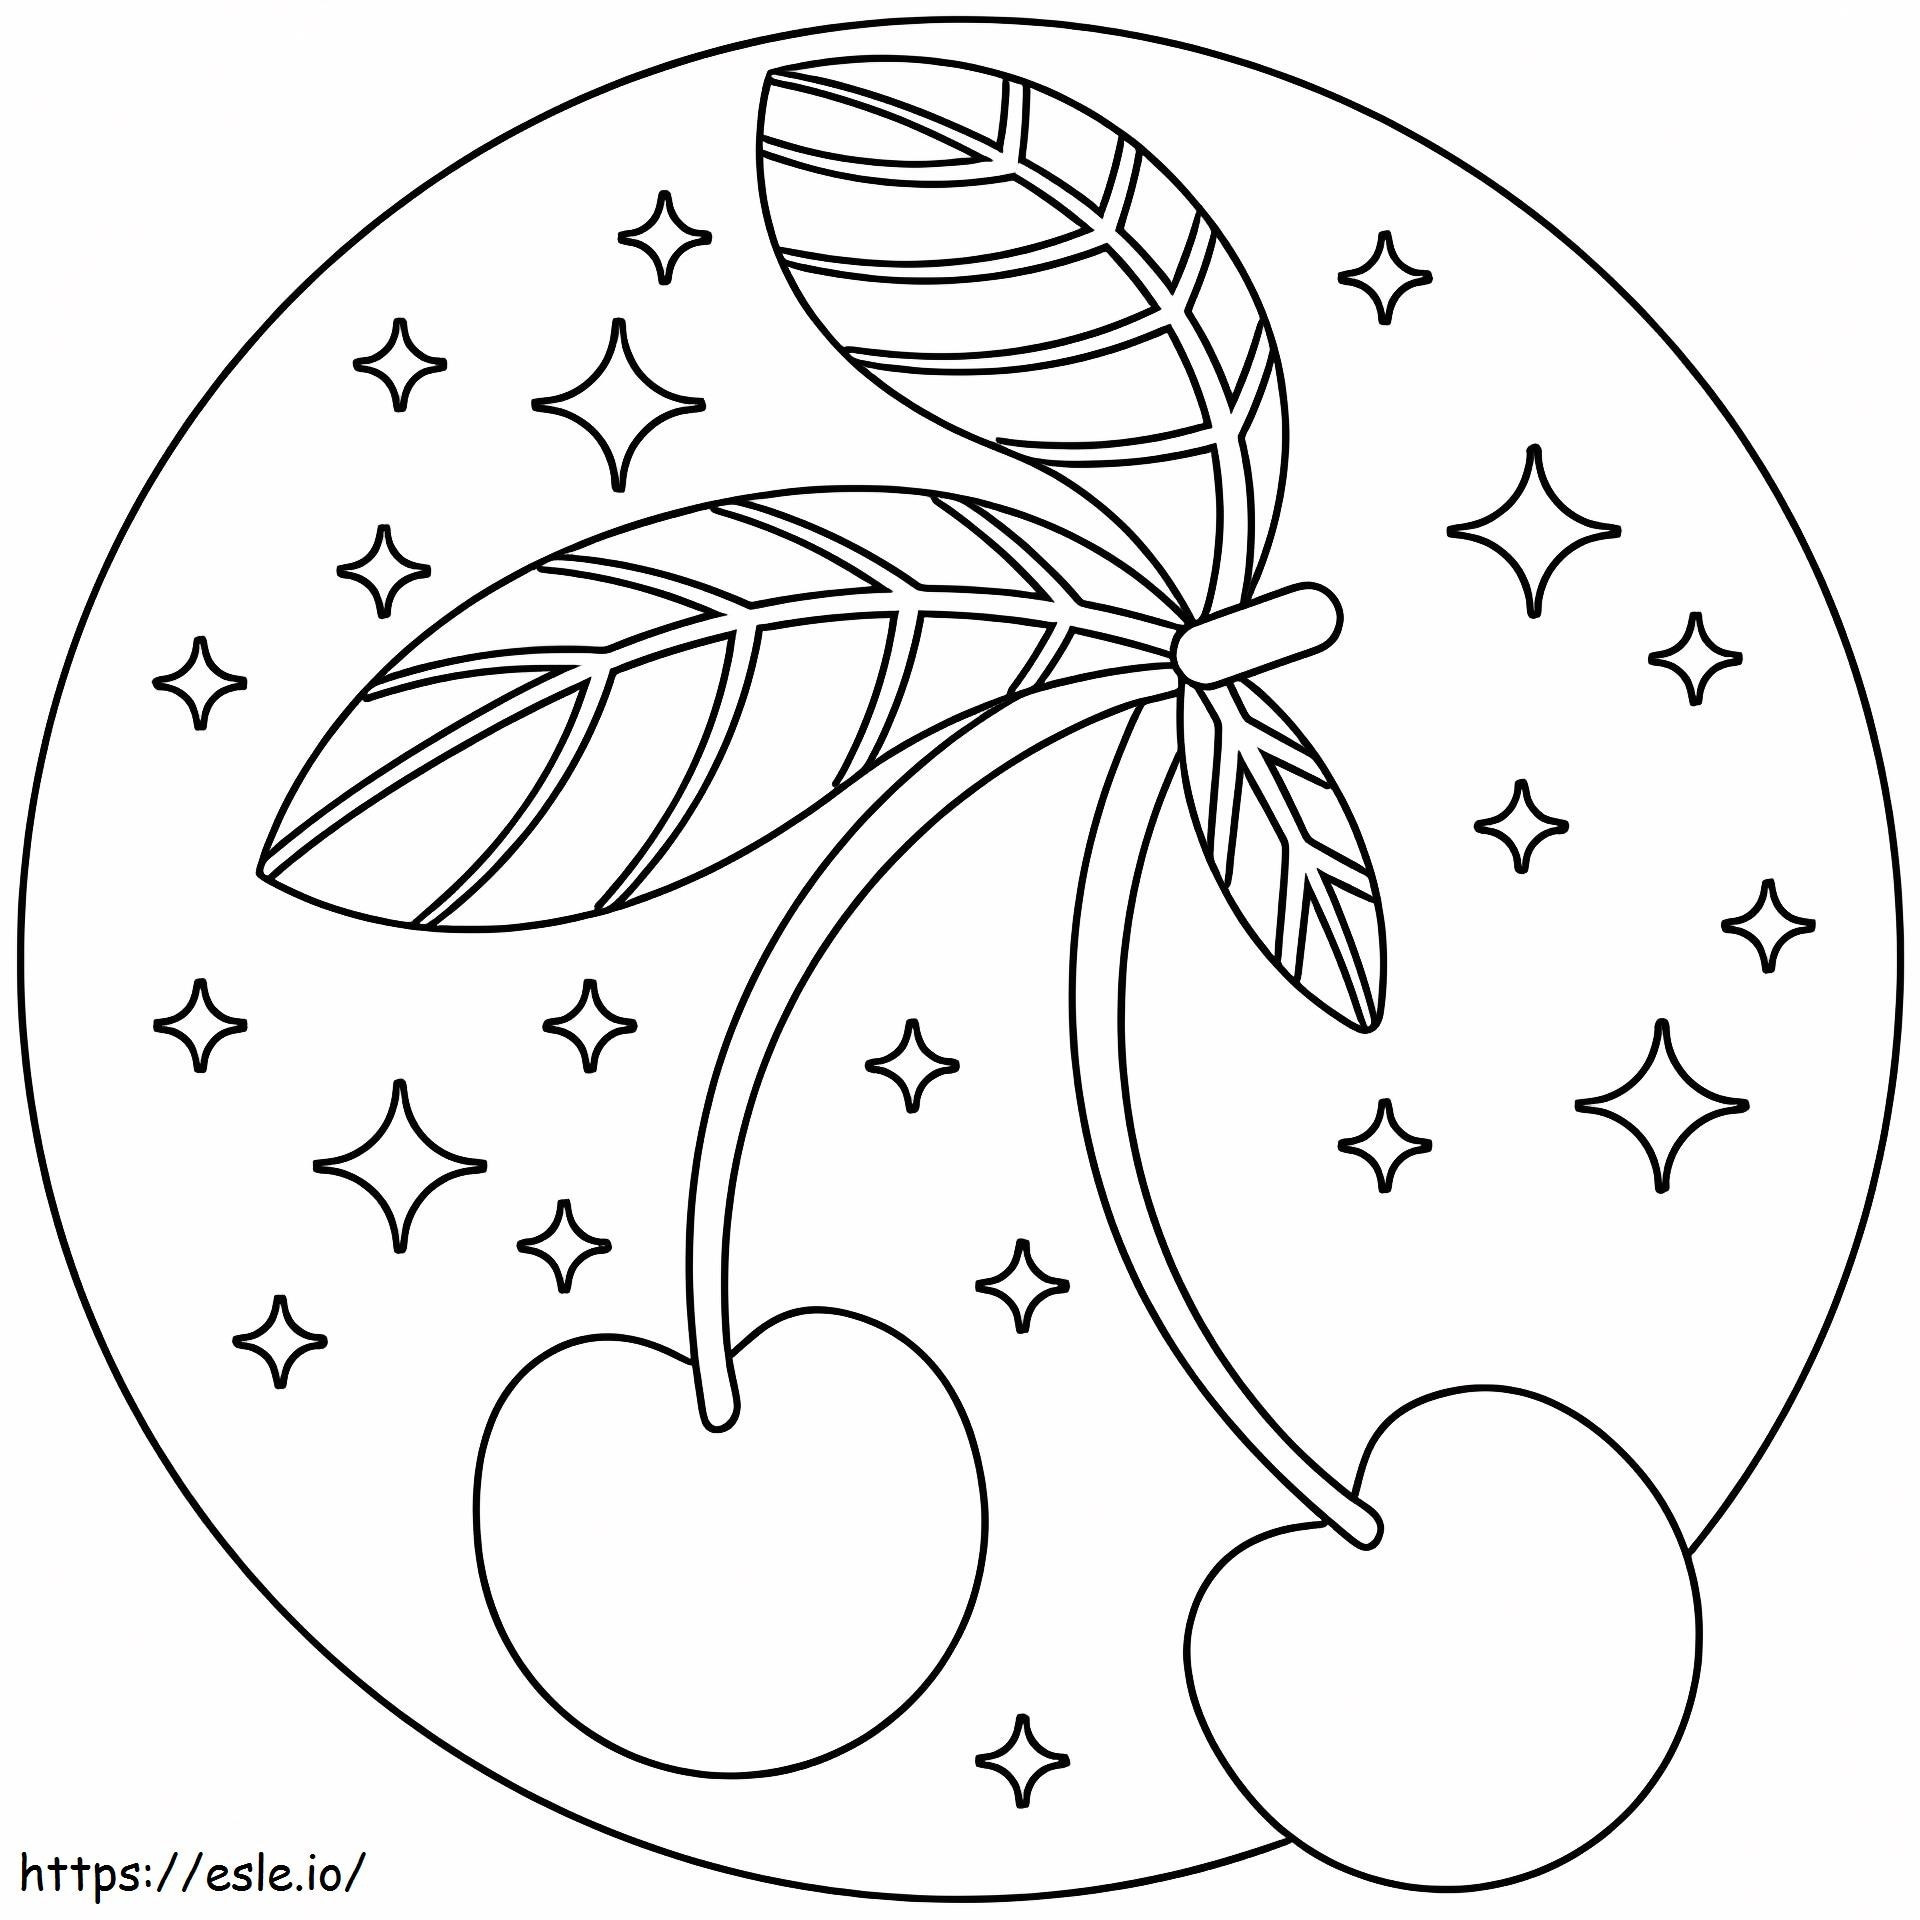 Awesome Cherry coloring page